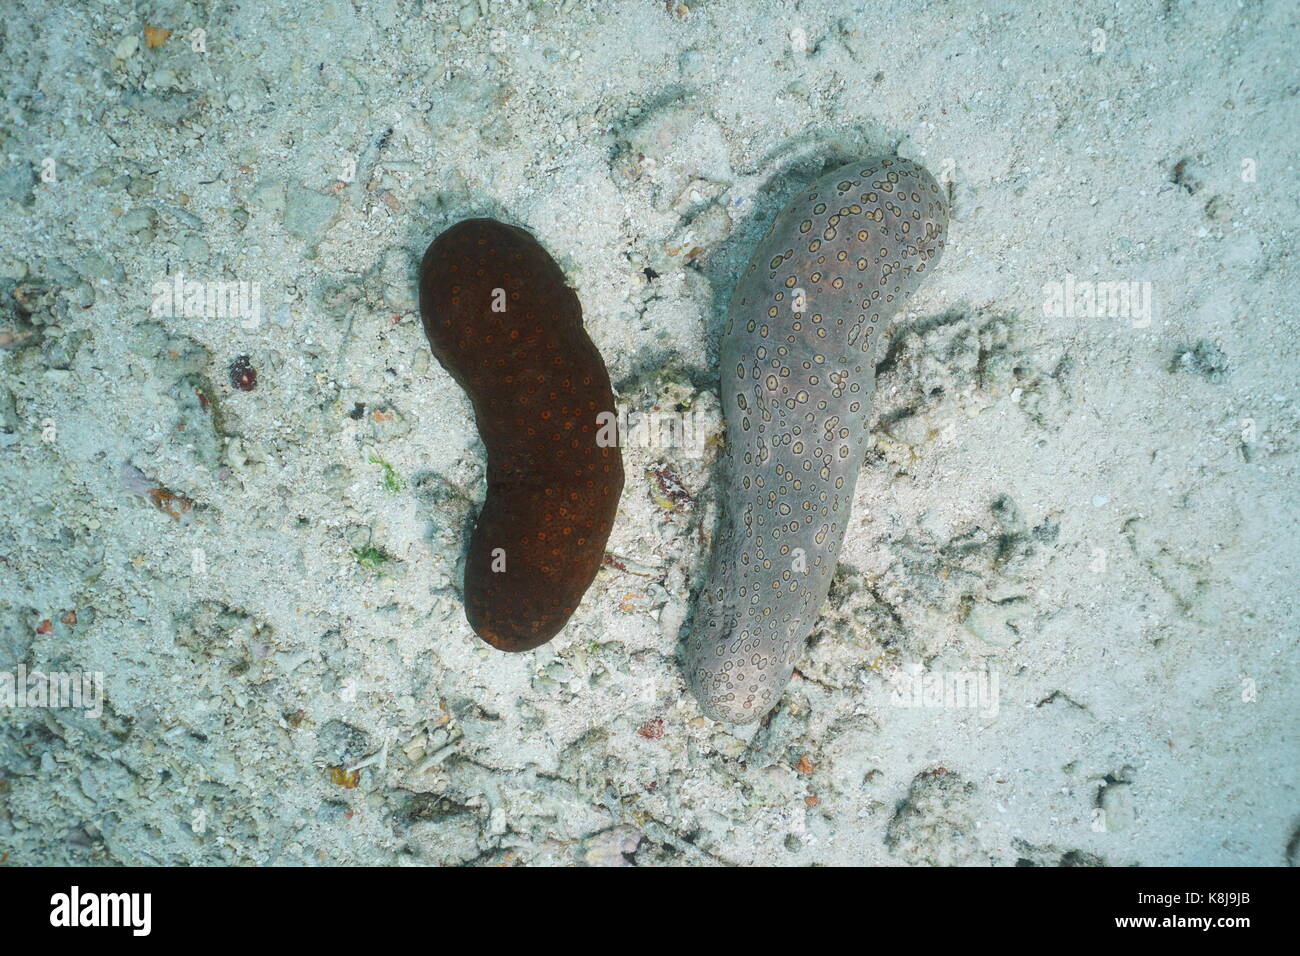 Two leopard sea cucumbers, Bohadschia argus, with different colors, underwater seen from above, Pacific ocean, French polynesia Stock Photo